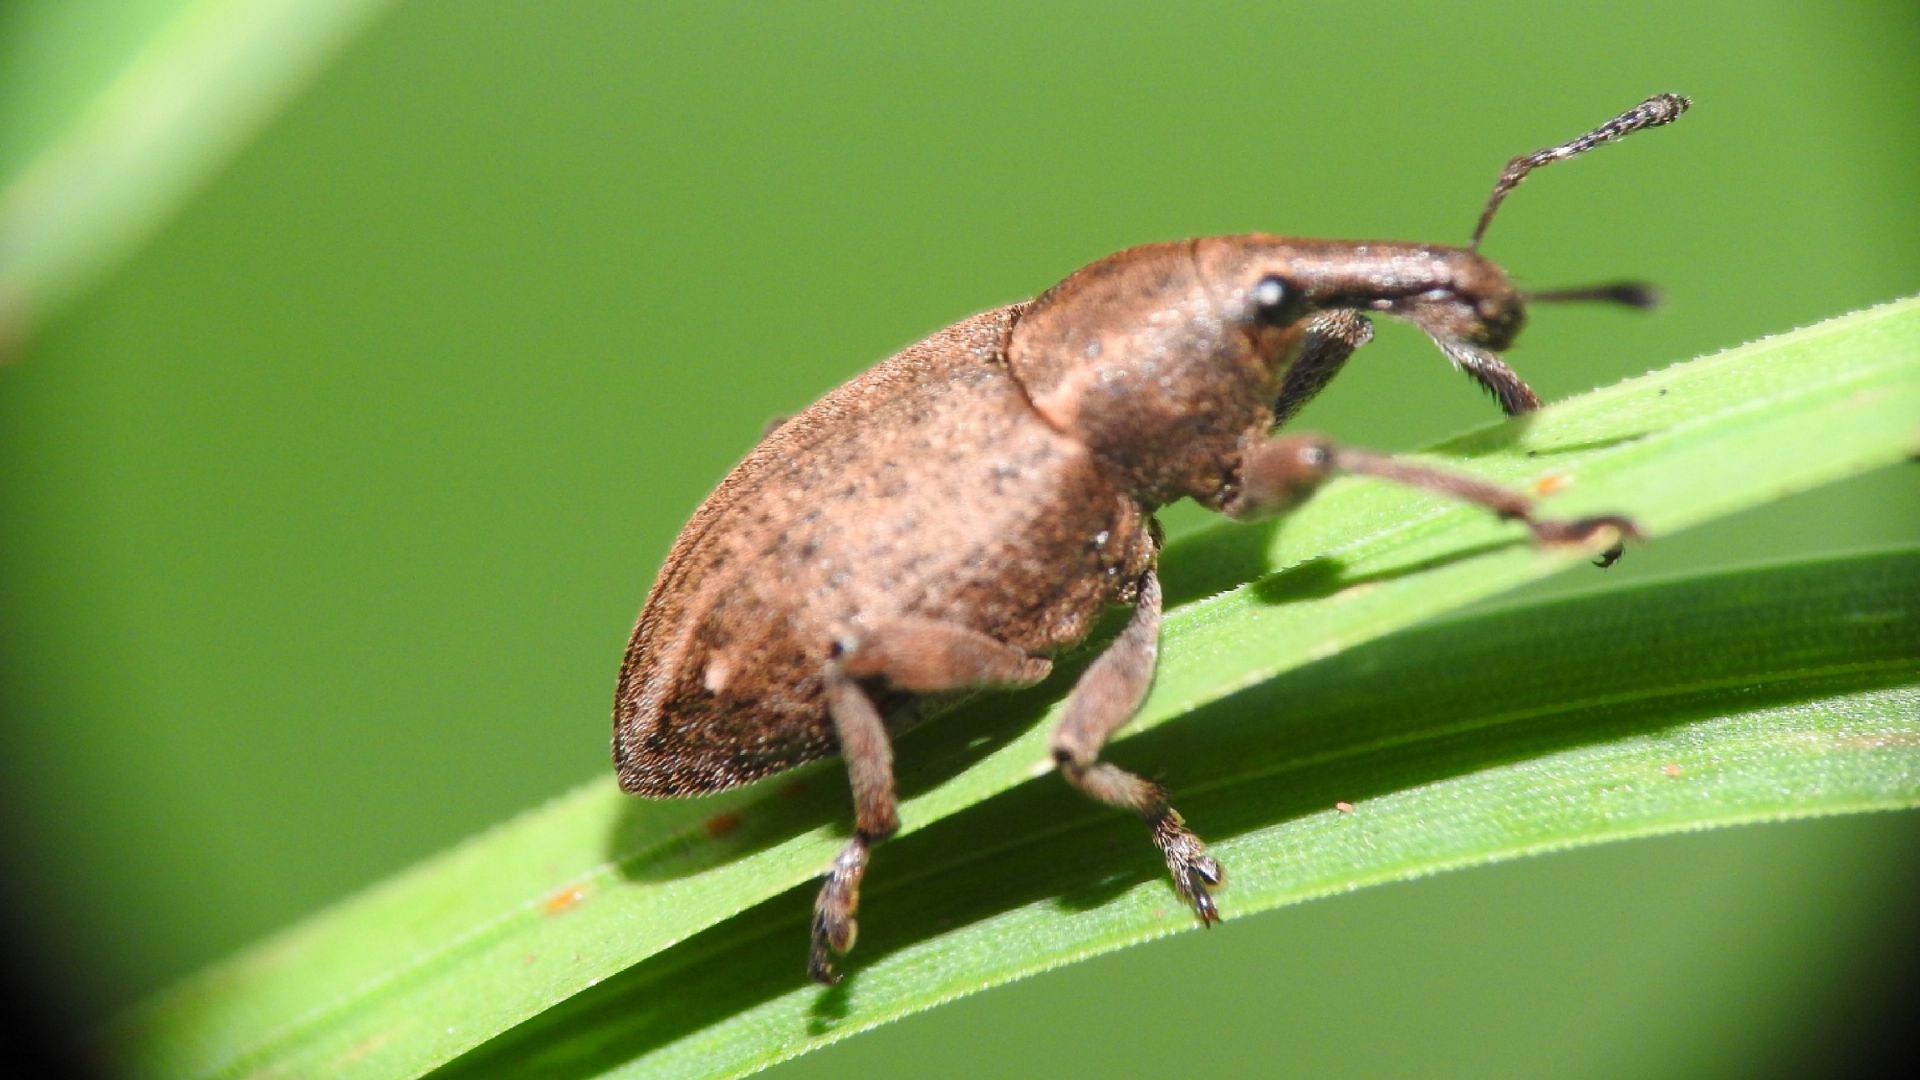 Top 8 Steps To Keep Weevils & Bugs Out Of Food